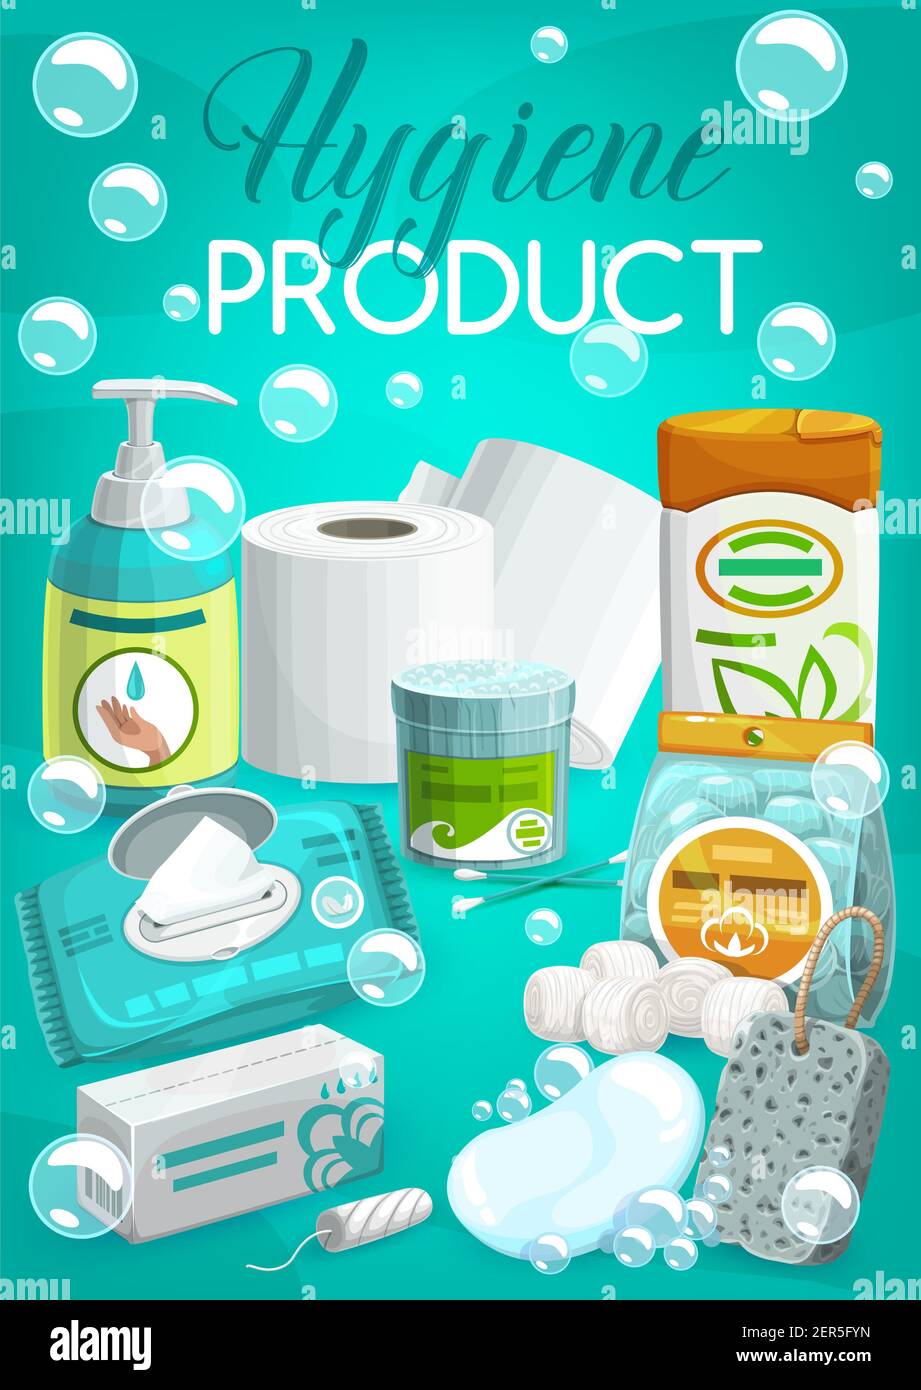 Personal hygiene products toiletries banner. Liquid soap or hand sanitizer, wipe tampon and toilet paper, cotton swabs and balls, shampoo Vector Image & Art - Alamy